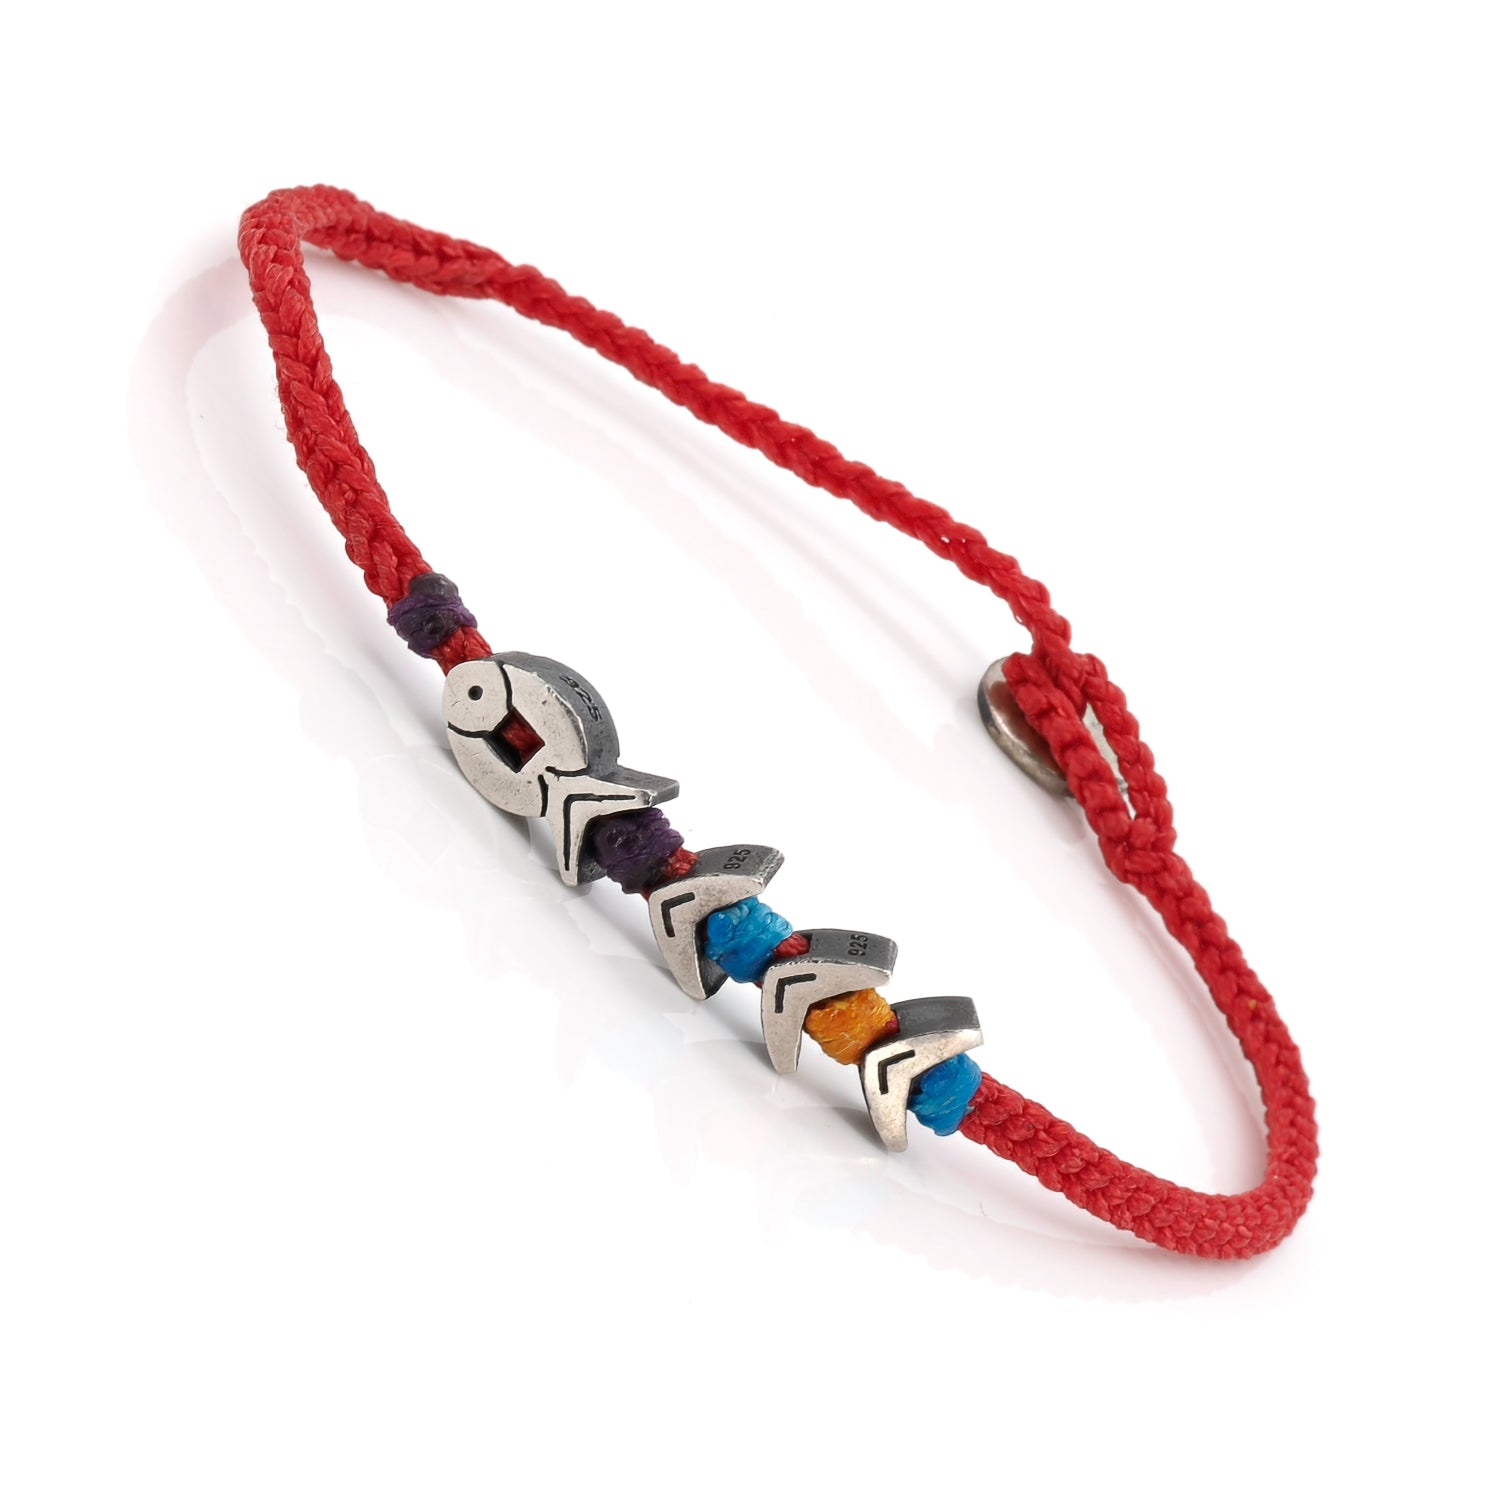 Red Woven Sterling Silver Fish Believe Braided Bracelet